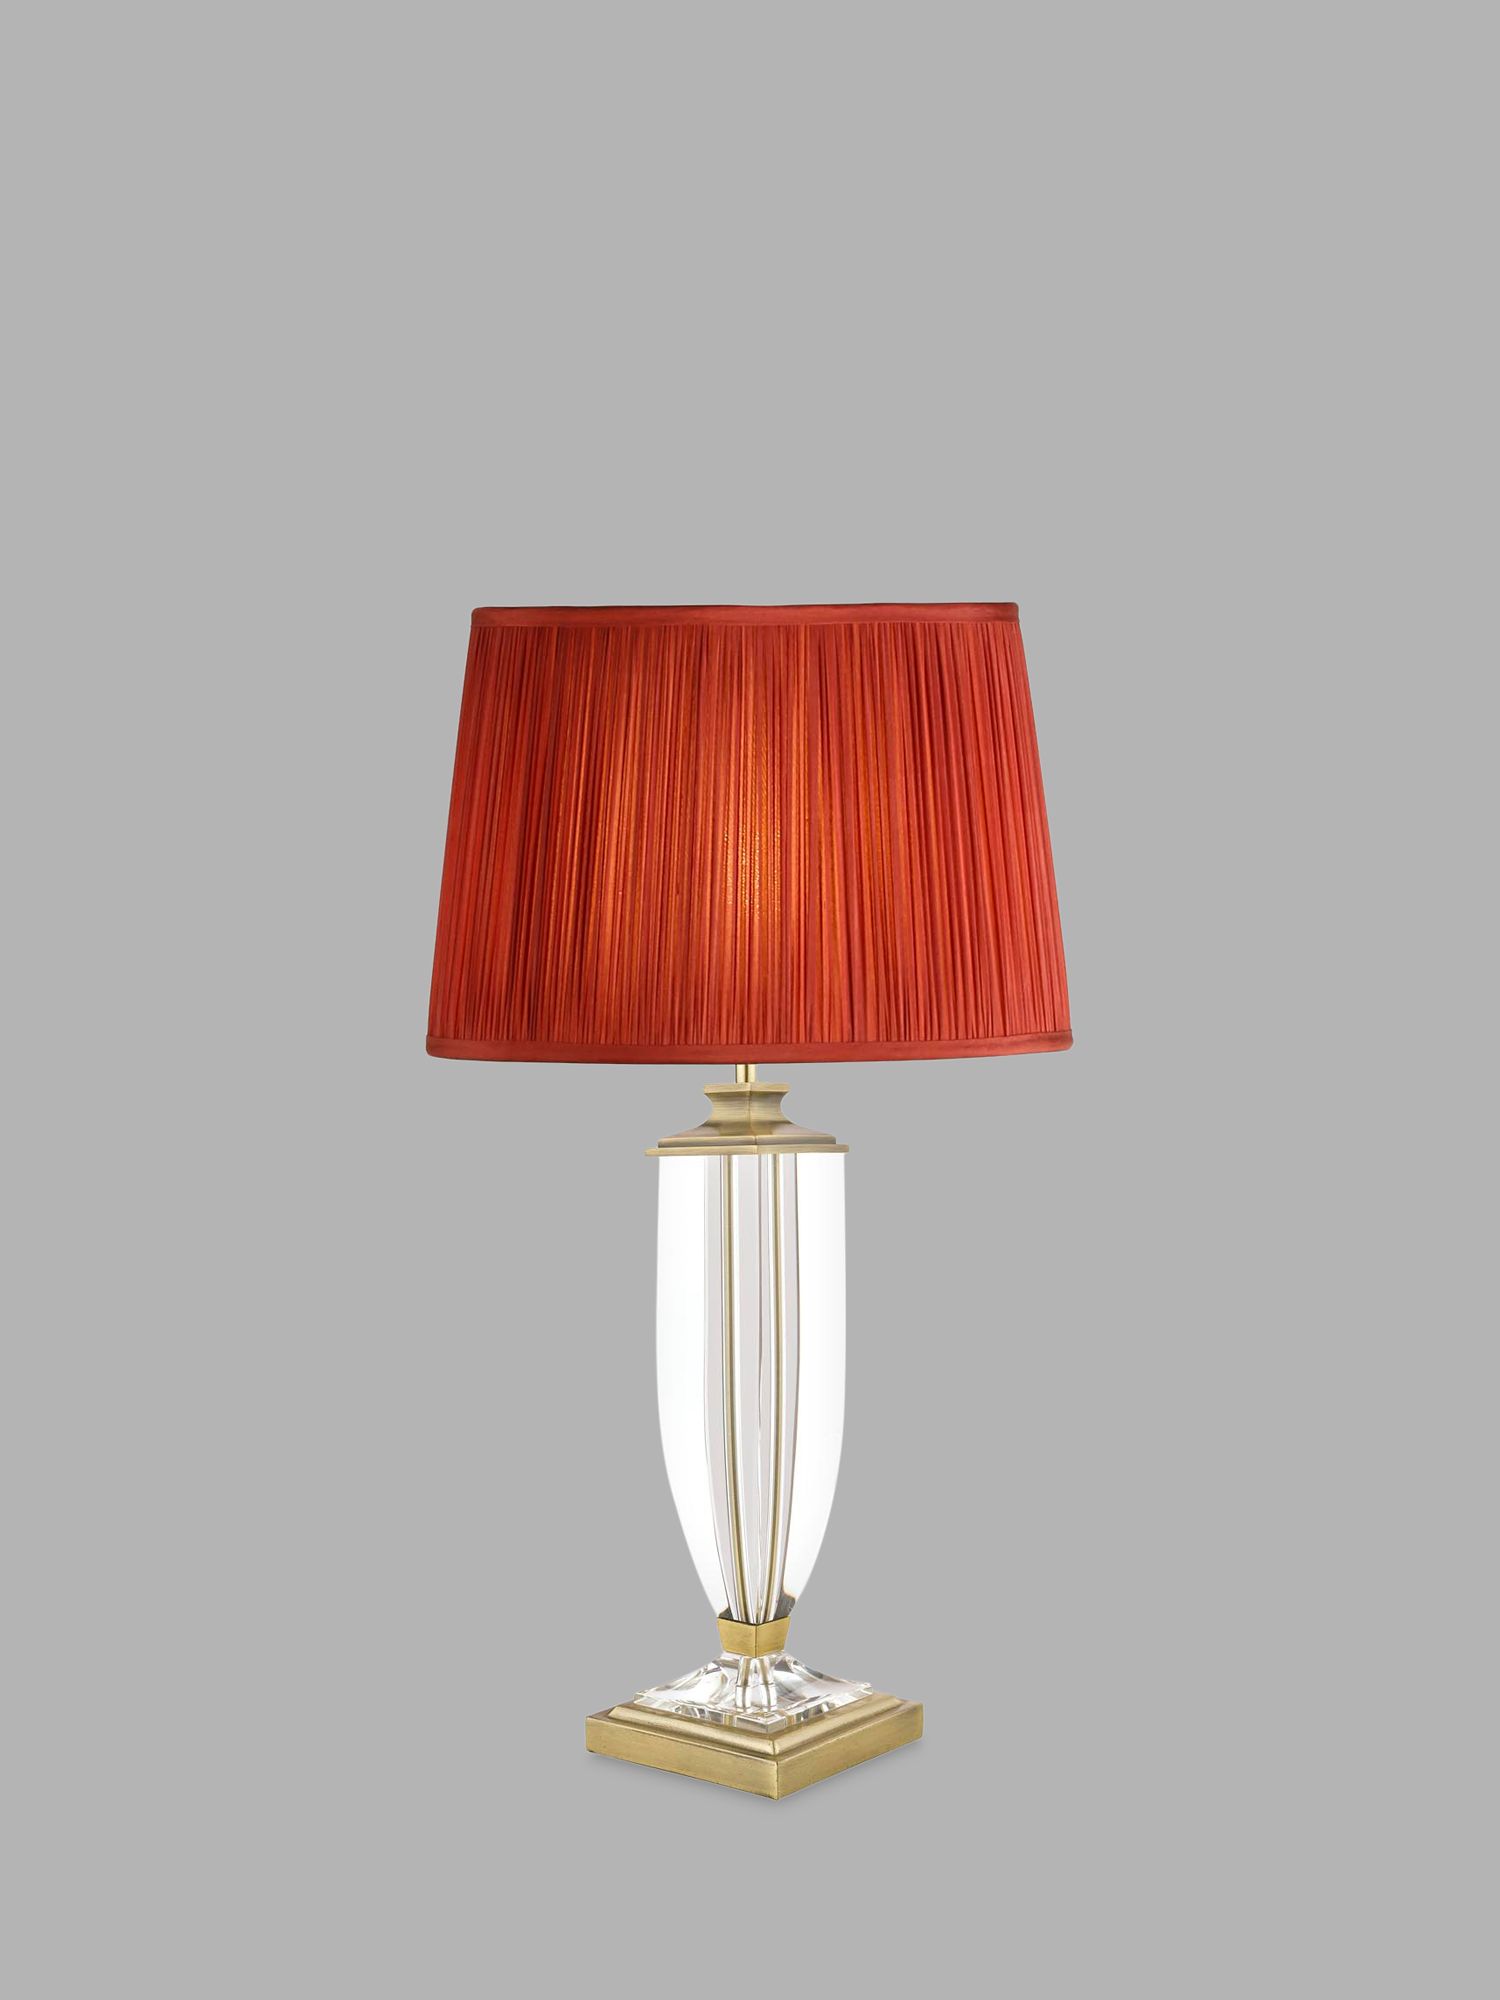 Photo of Laura ashley carson grande crystal table lamp antique brass